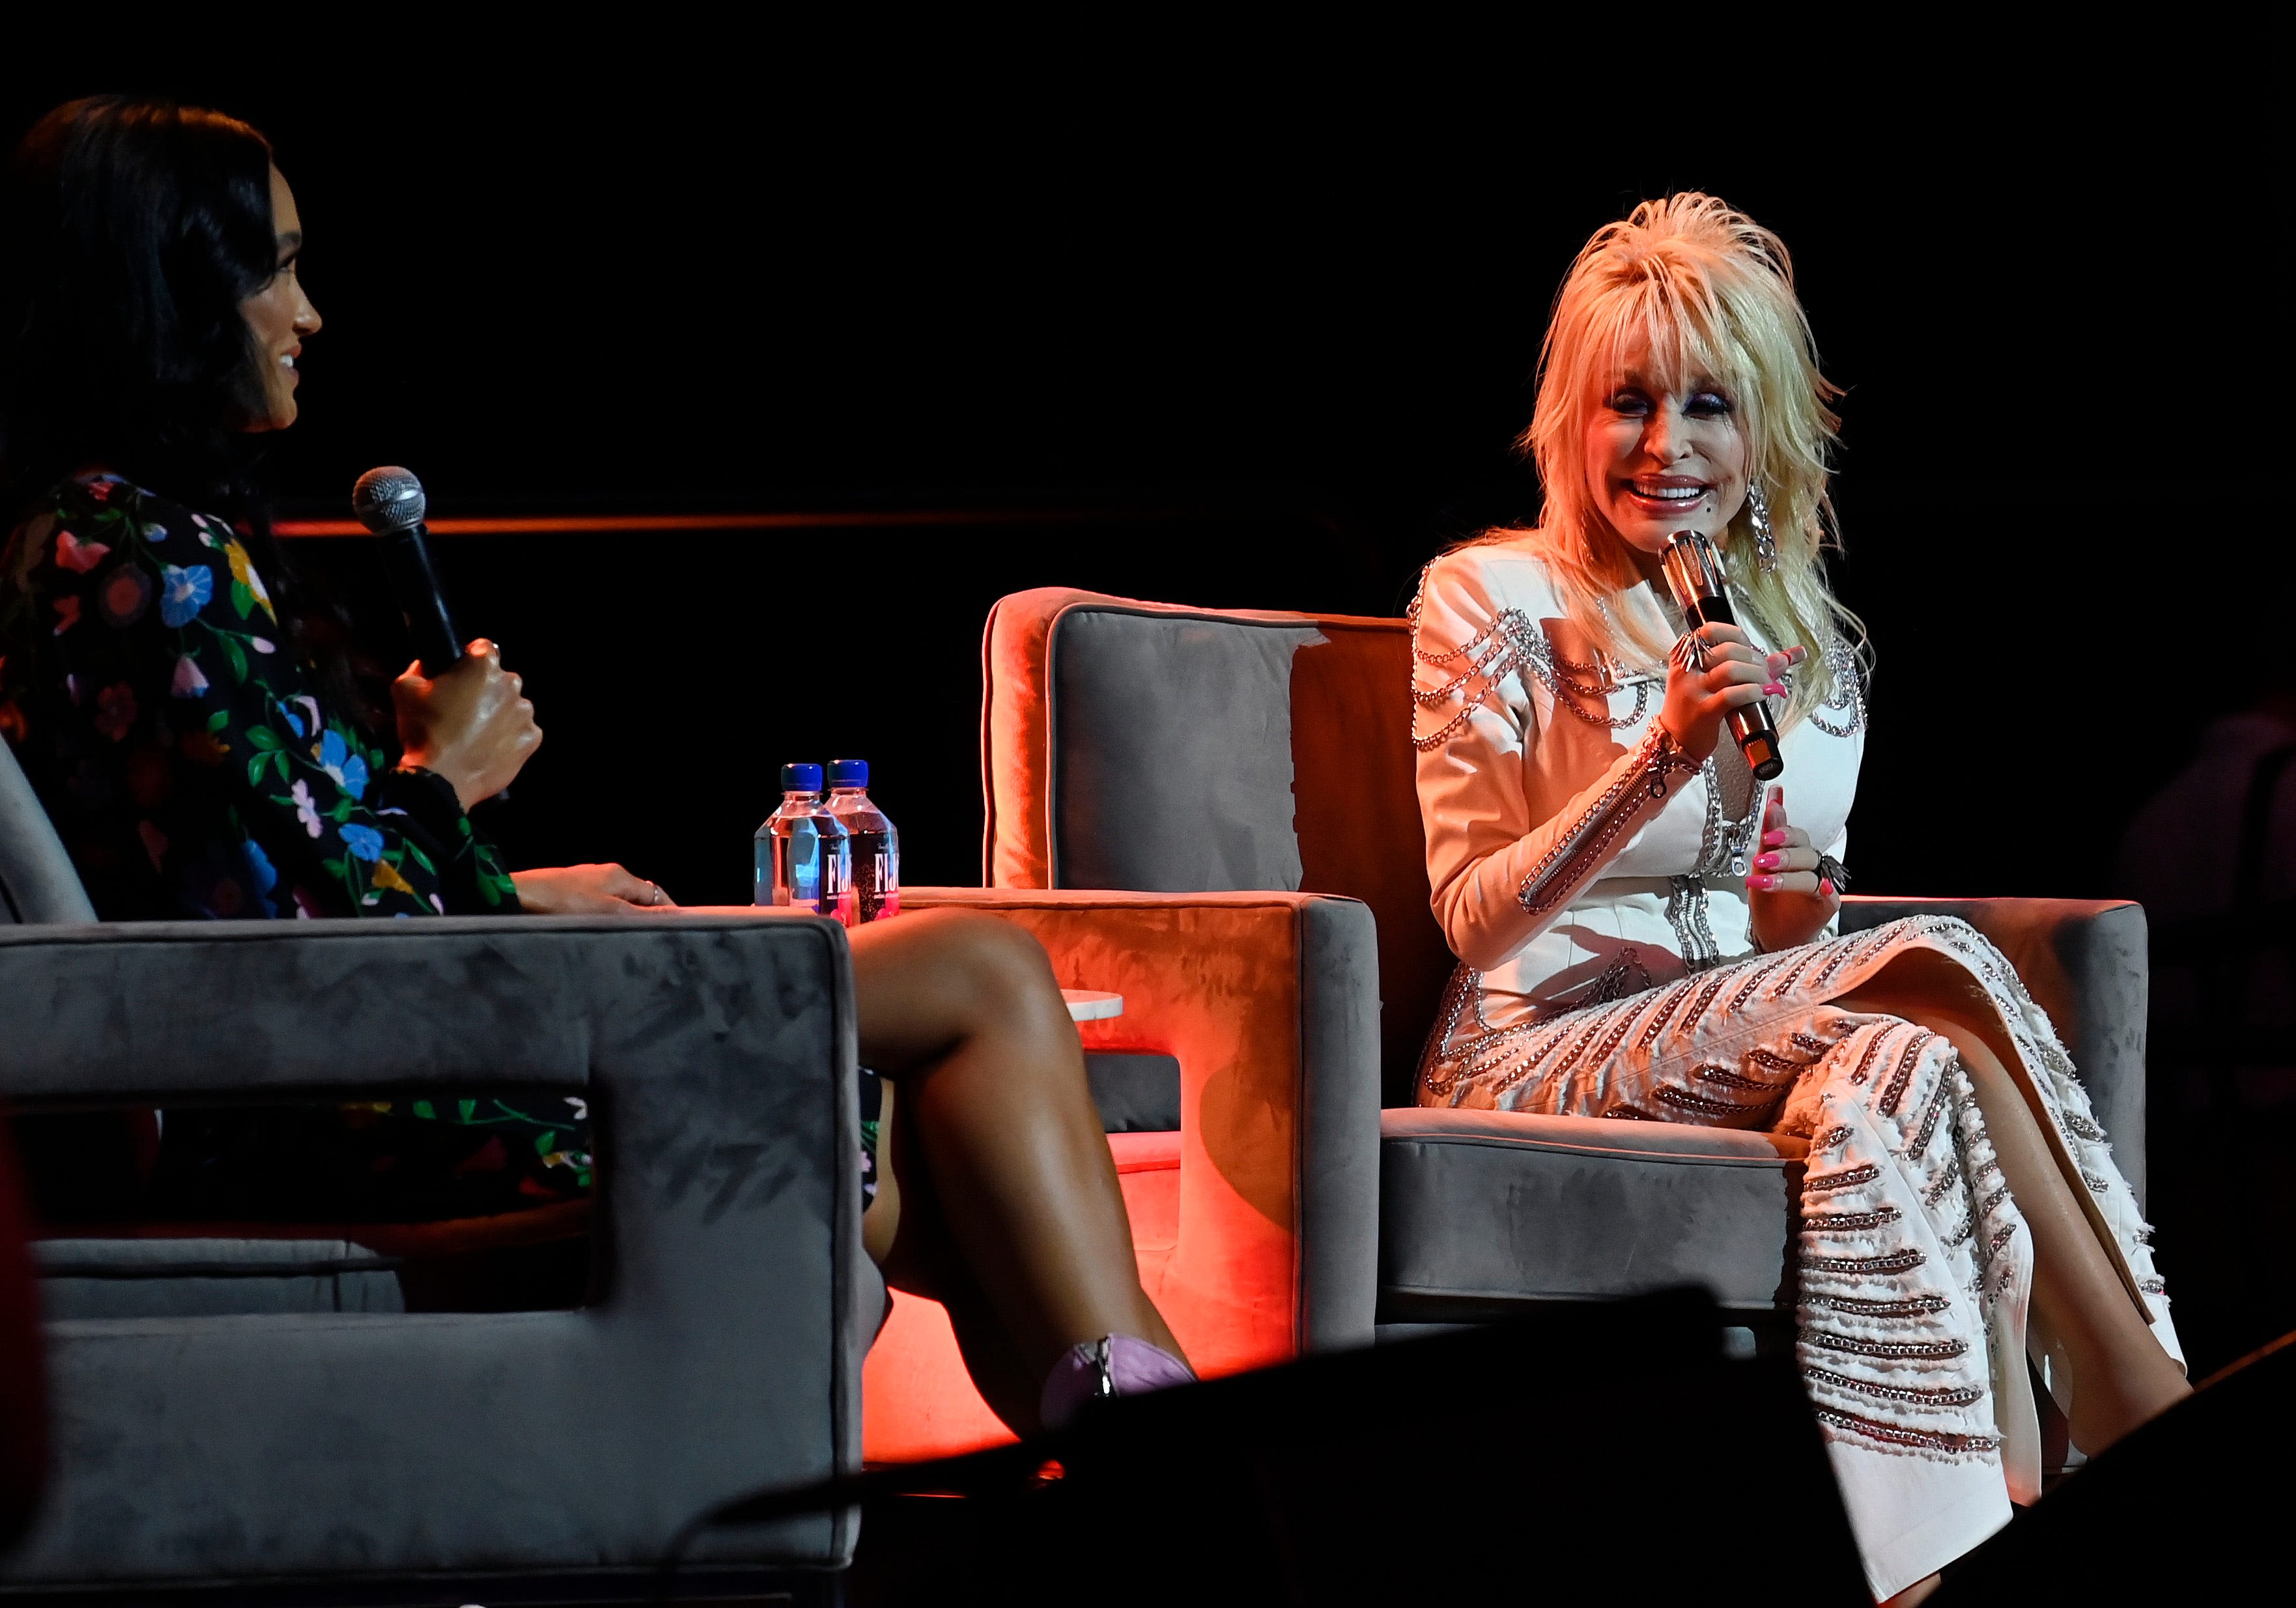 Surprises and star power: 5 unforgettable moments from CMA Fest's first day